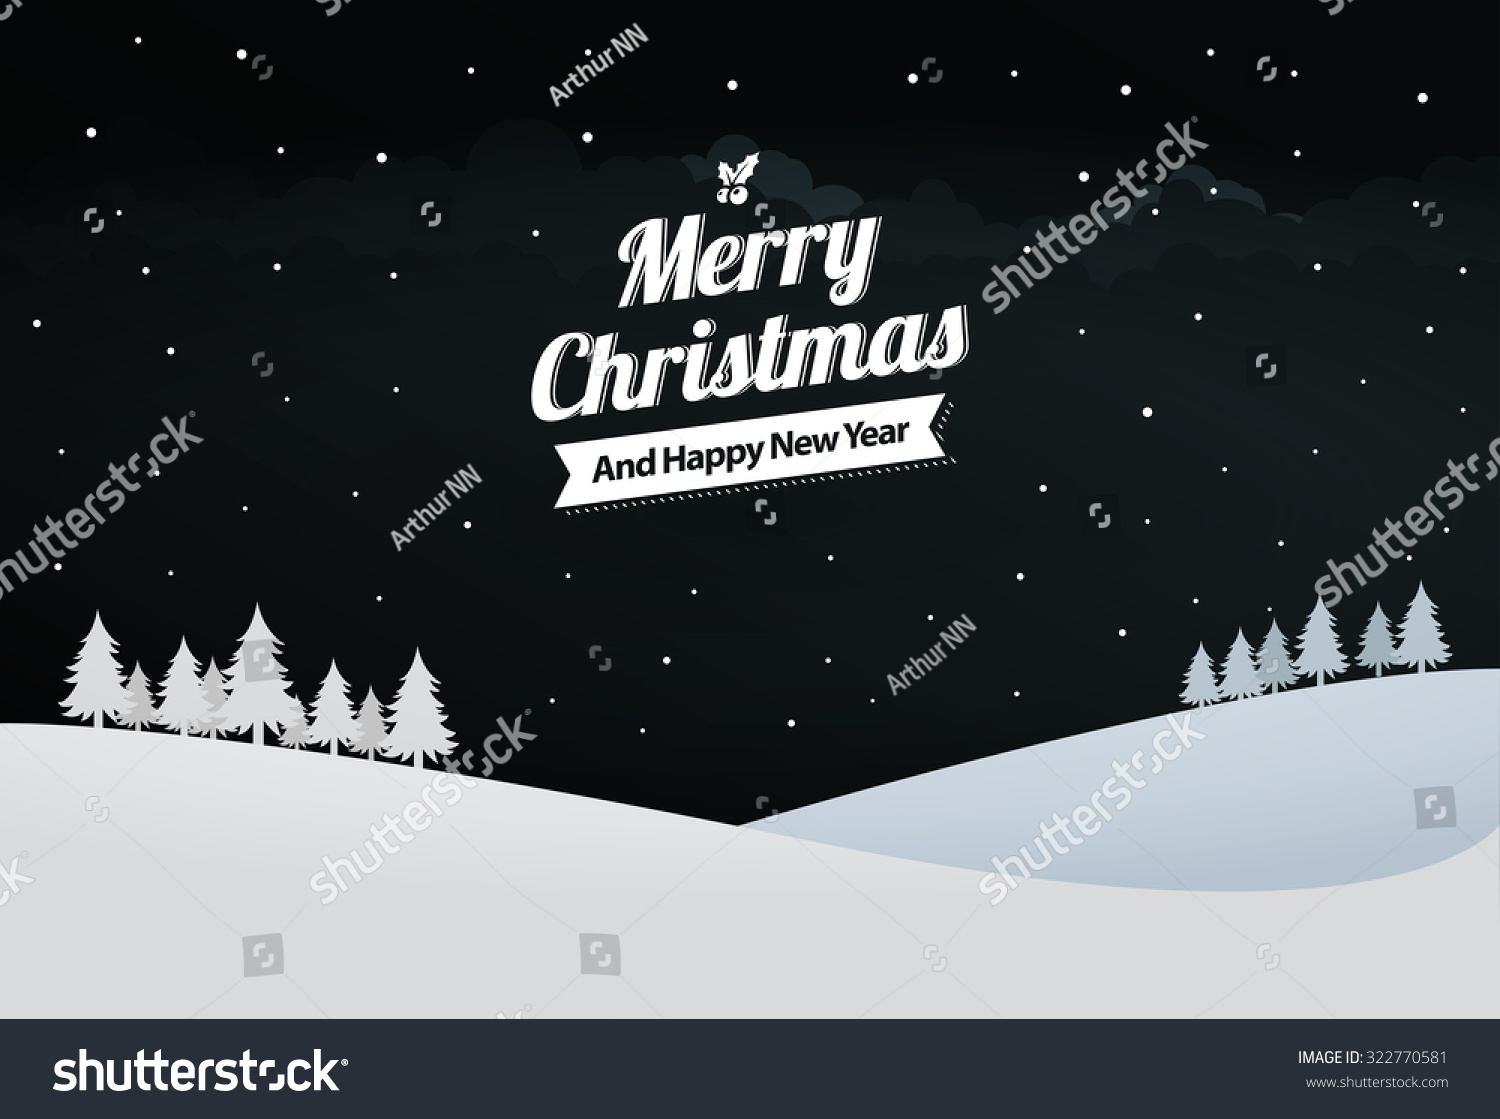 Christmas & Happy New Year Snow Background Vector - 322770581 ...